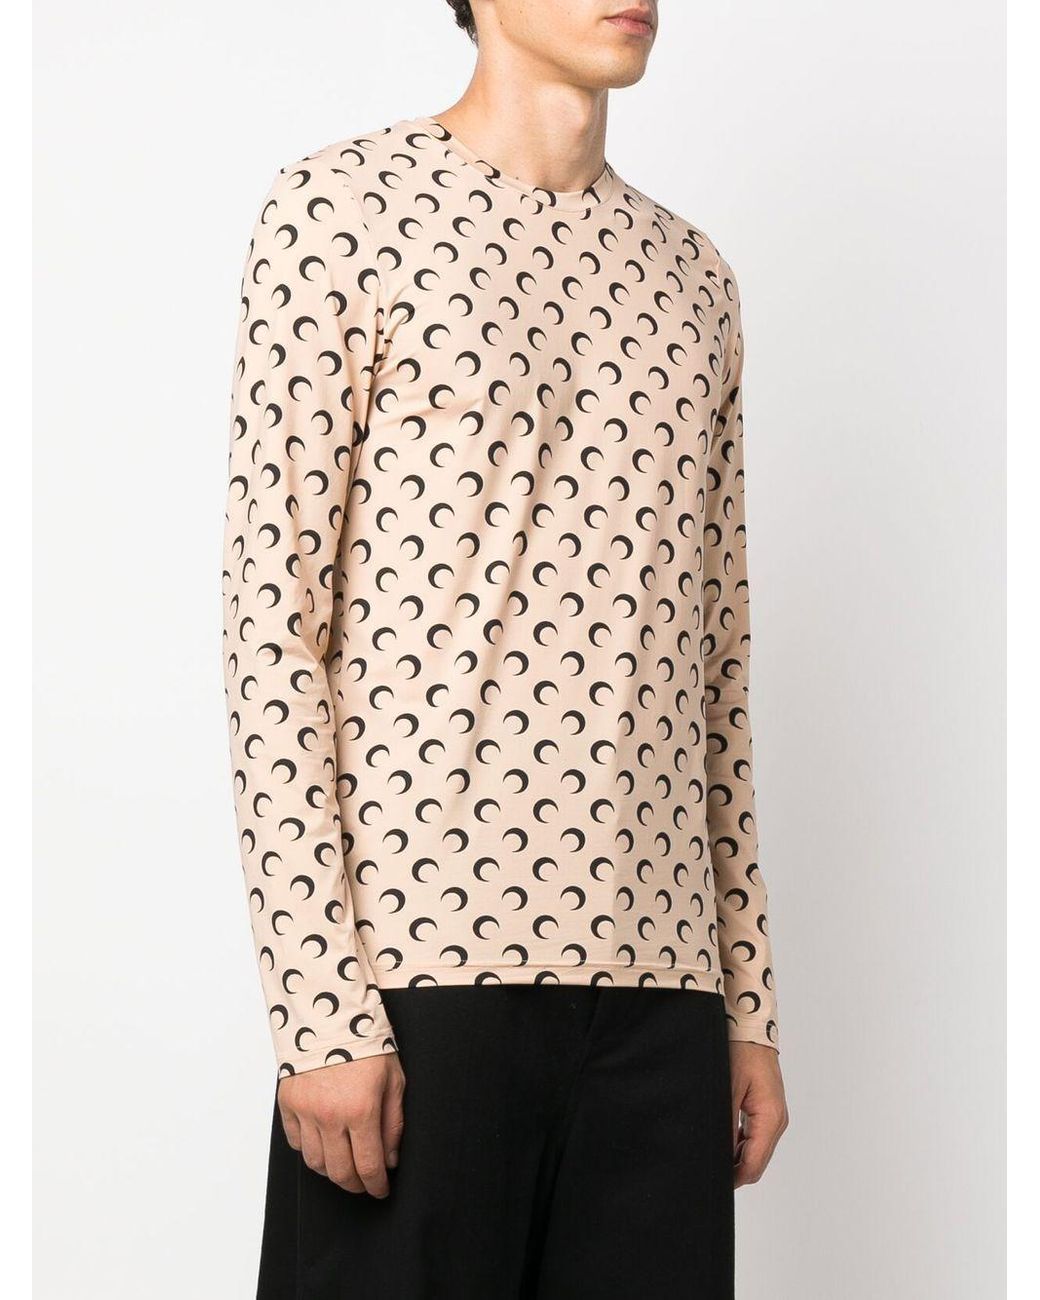 Marine Serre Neutral Crescent Moon Print Top in Pink for Men | Lyst